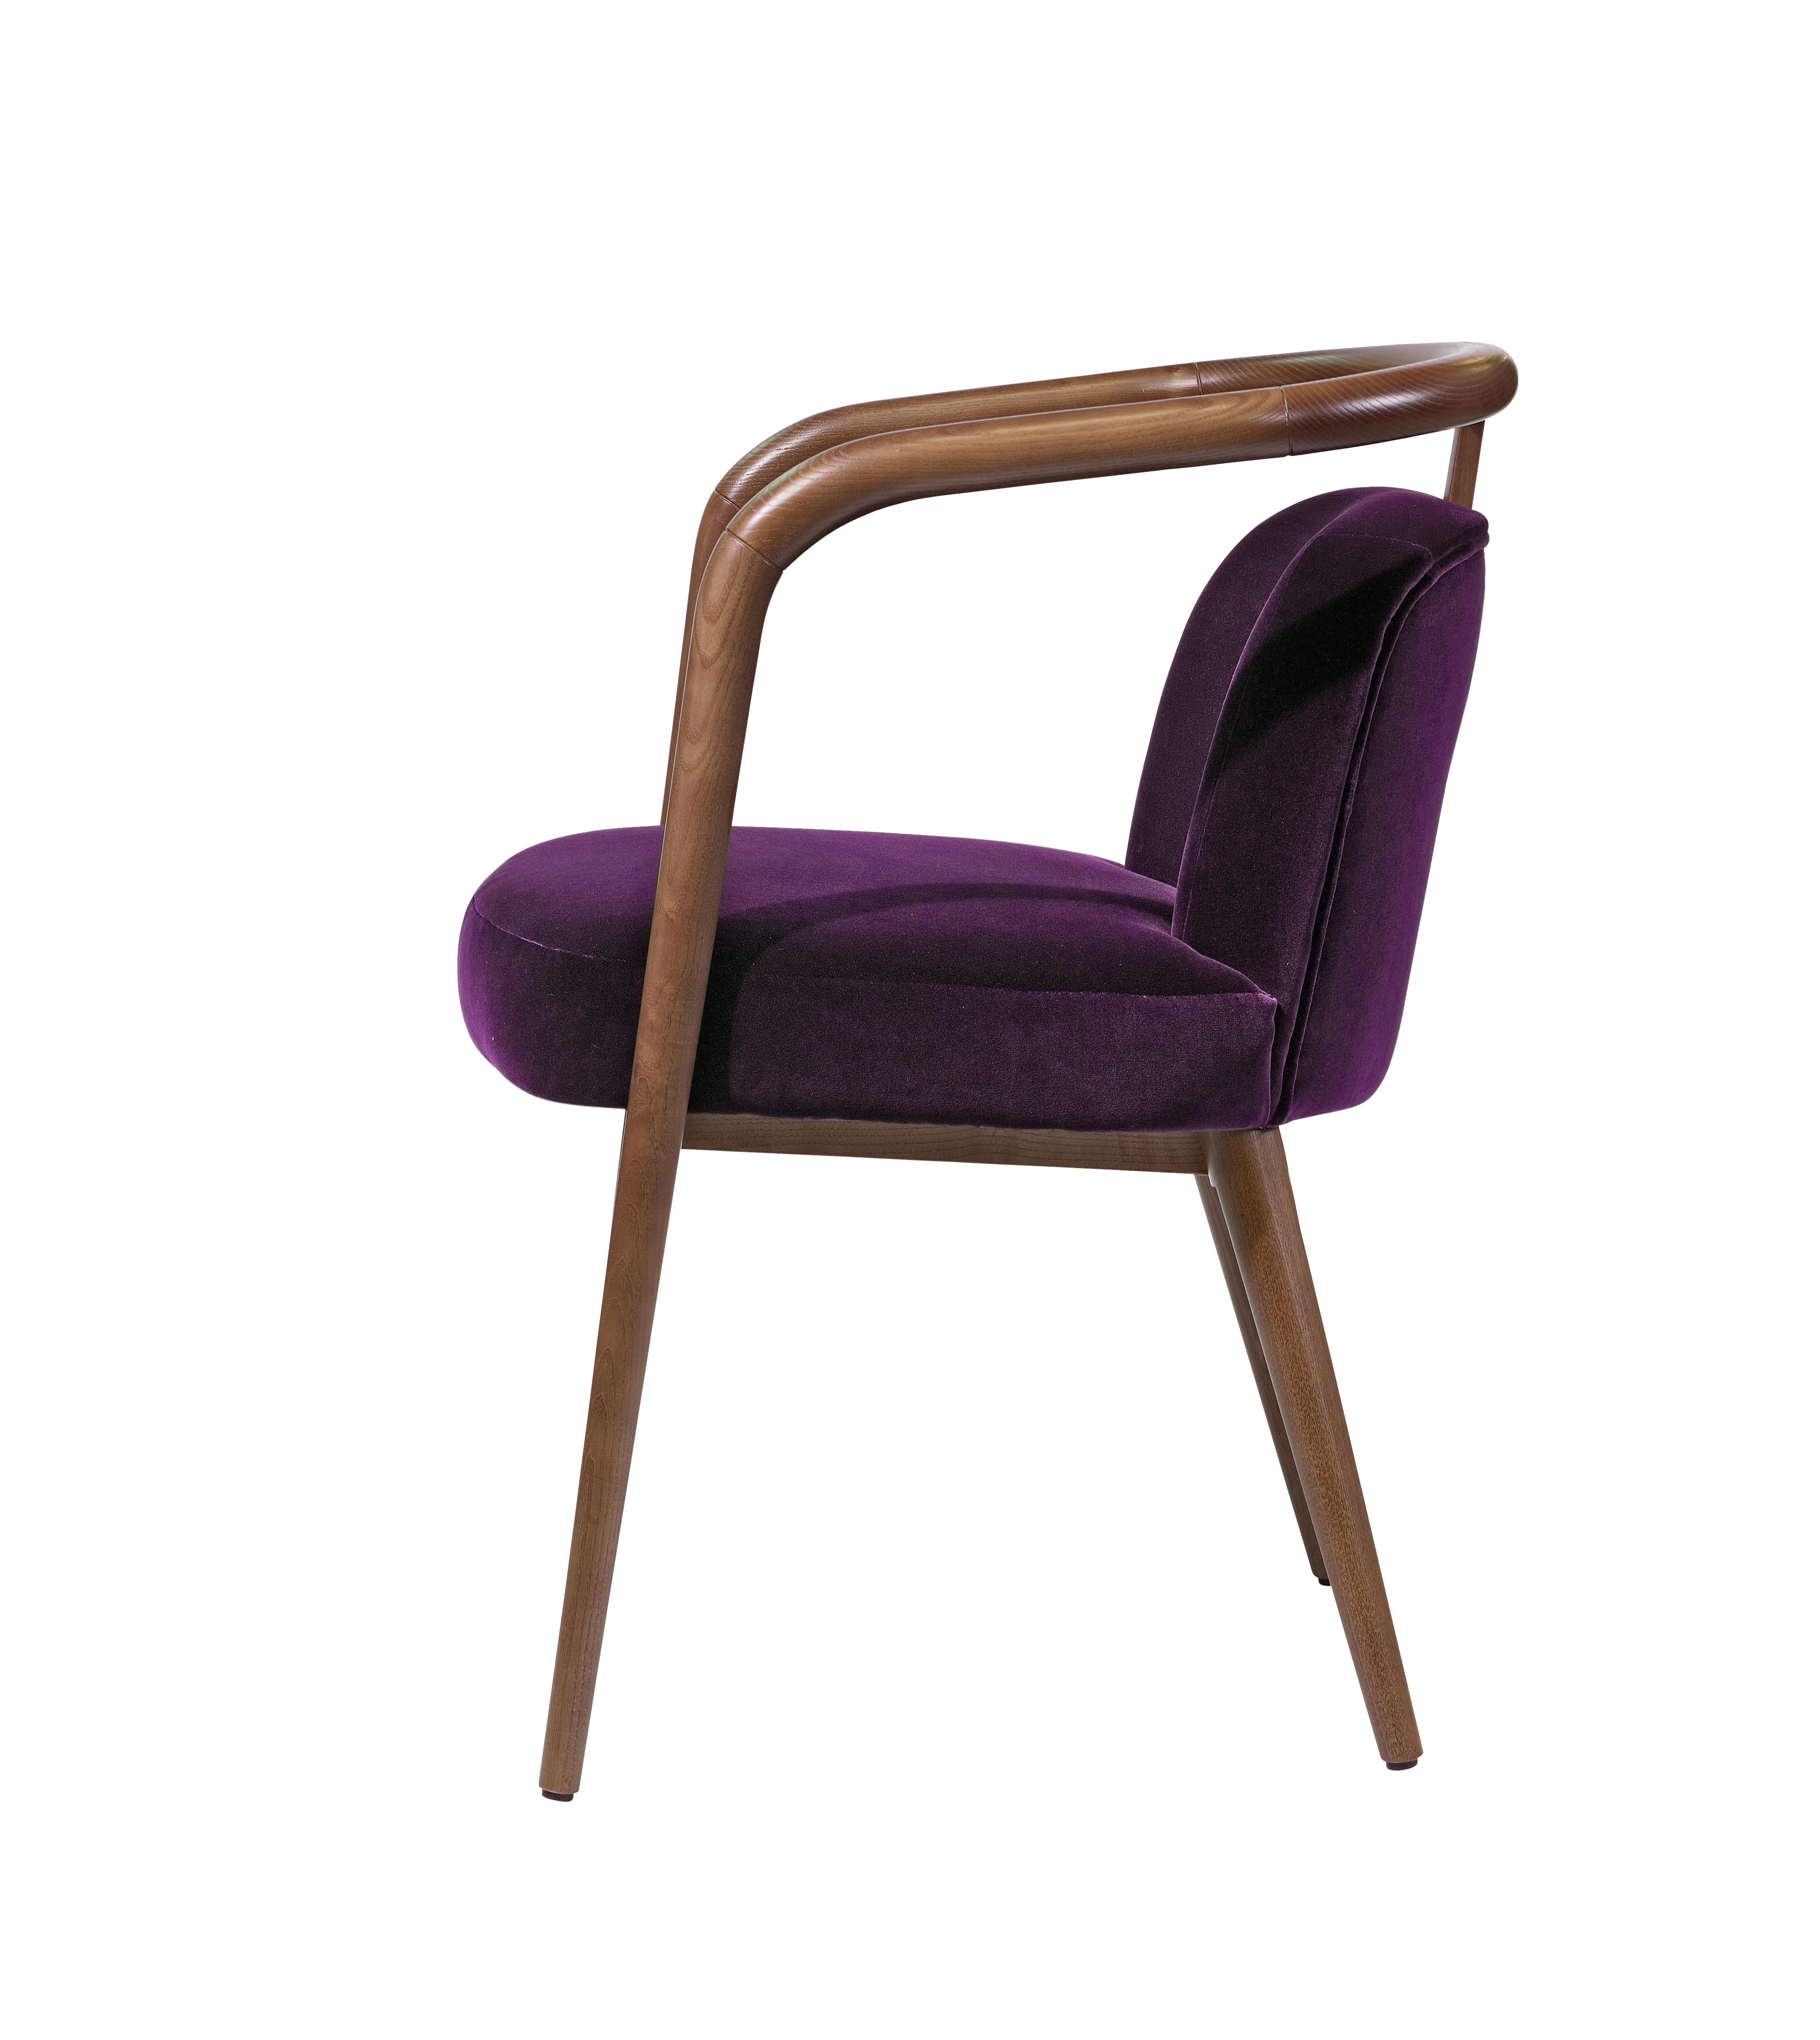 A sleek chair with an artistic appeal, that was inspired by the architecture of New York City buildings in this case The Essex Building in Central Park south.
This chair is designed to fit in many environments, no matter the affair, in order to